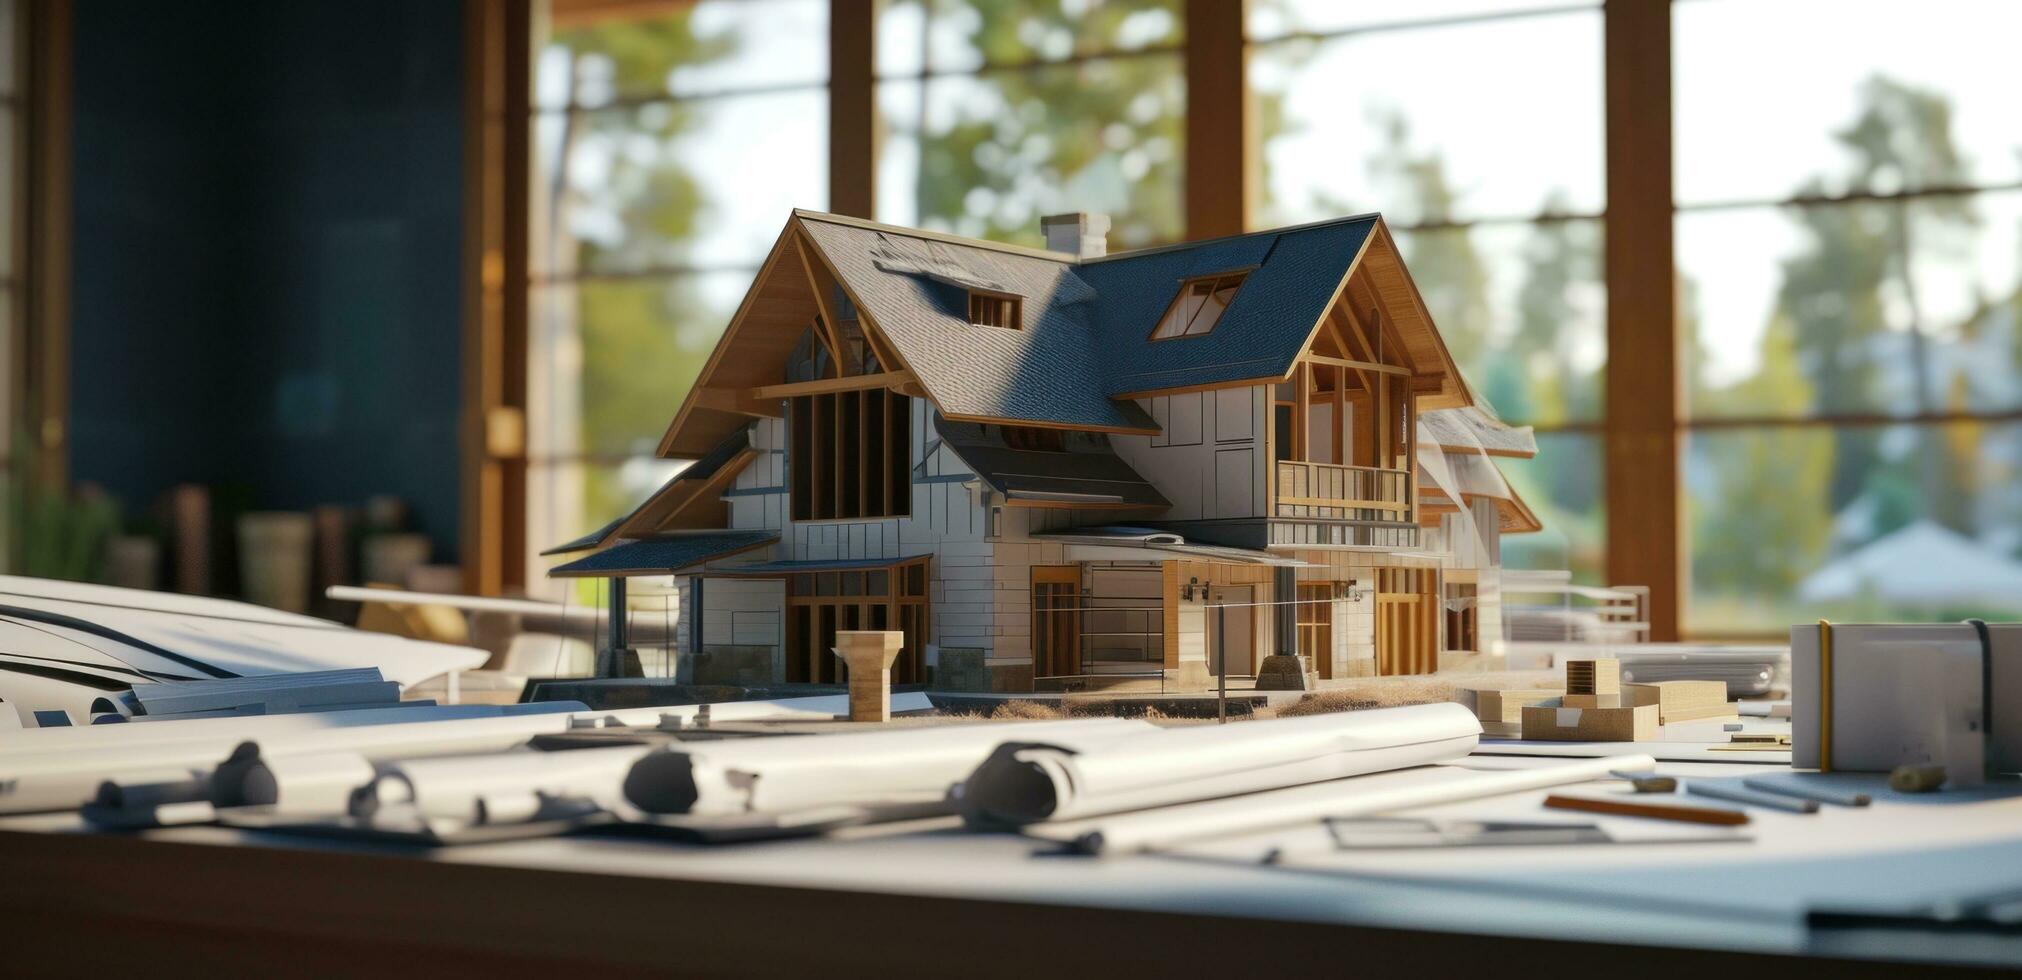 AI generated a model home sitting on a table with various architectural drawings, photo